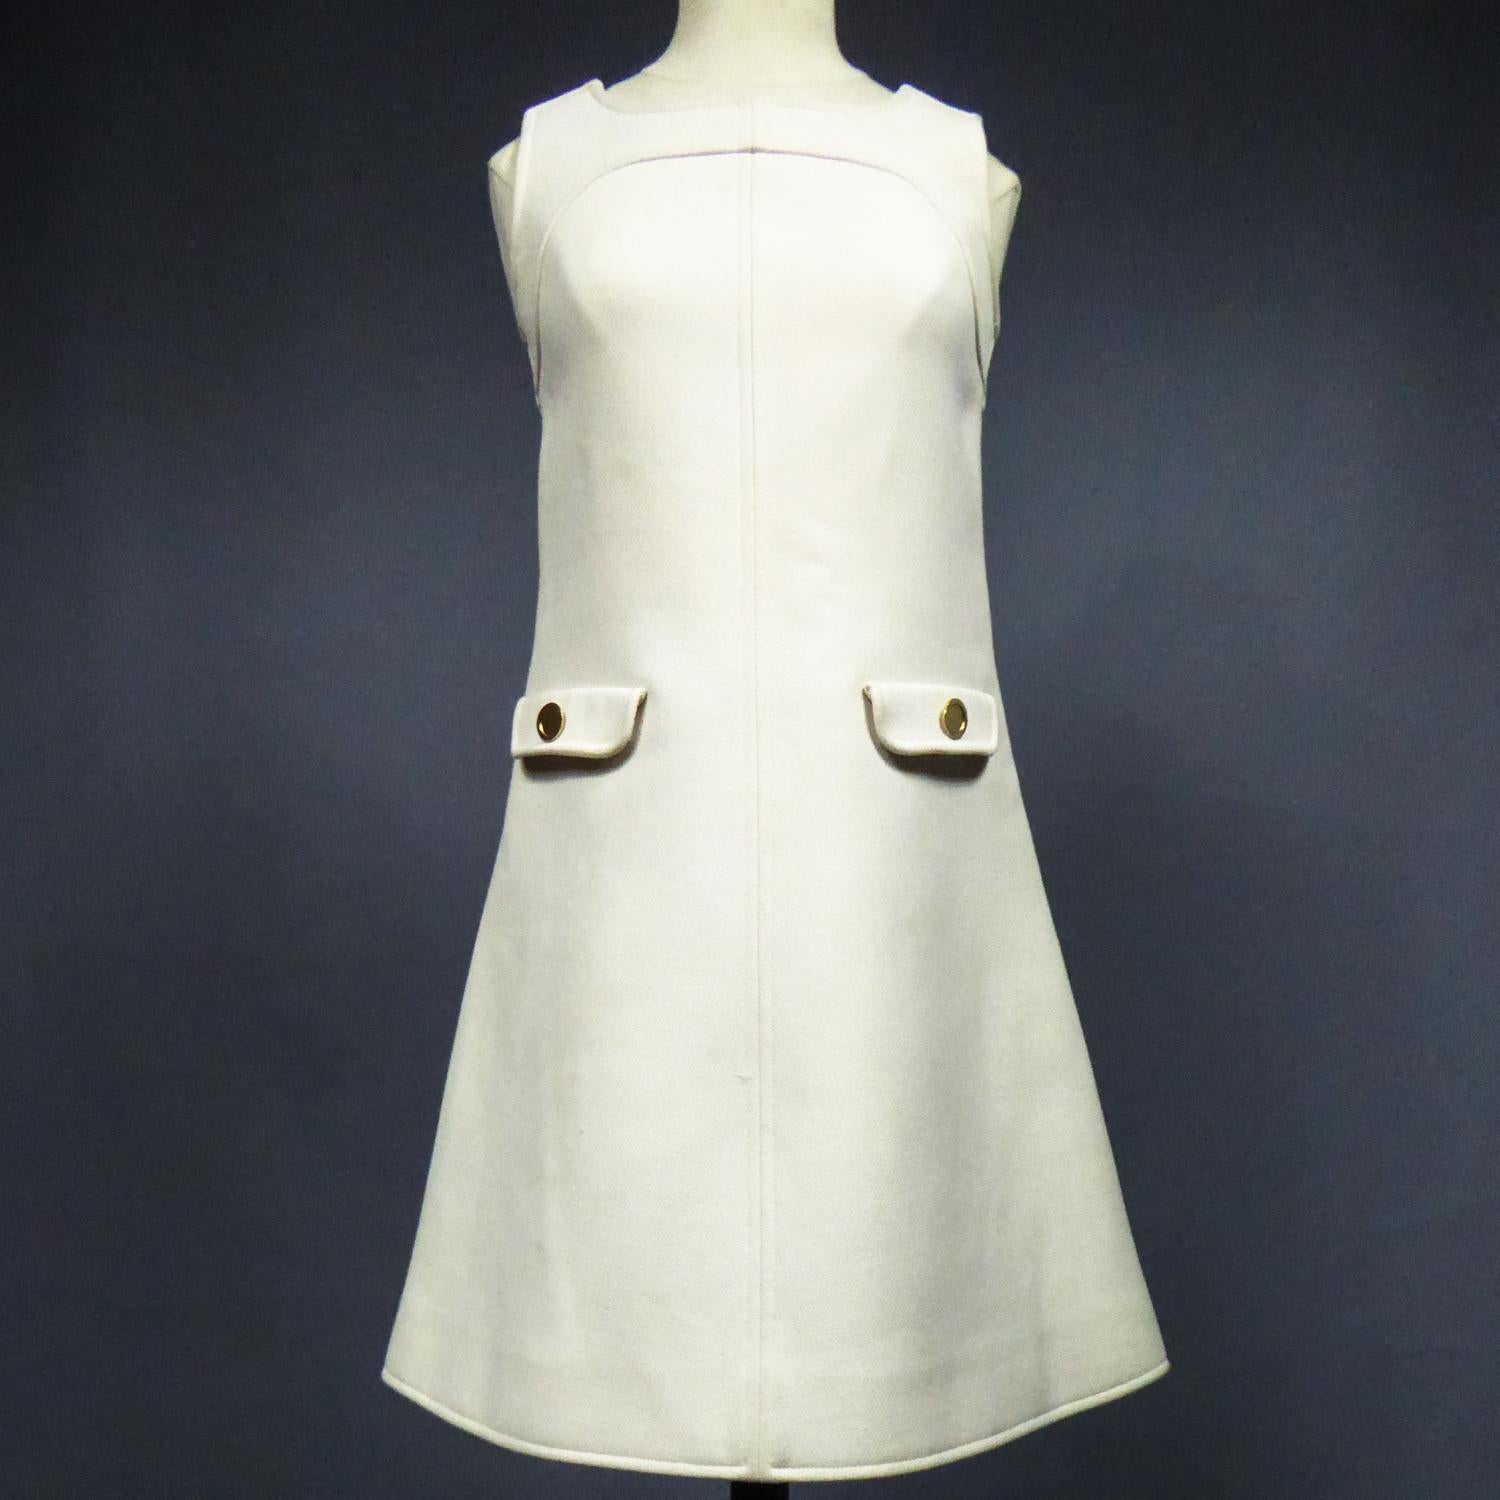 Circa 1968
France

An André Courrèges Haute Couture mini day dress in tchick cream jersey from the end of the 1960s. Honeycomb-shaped cotton jersey with the architectural heaviness of the Gazar frequently used in Haute Couture. Chasuble sleeveless